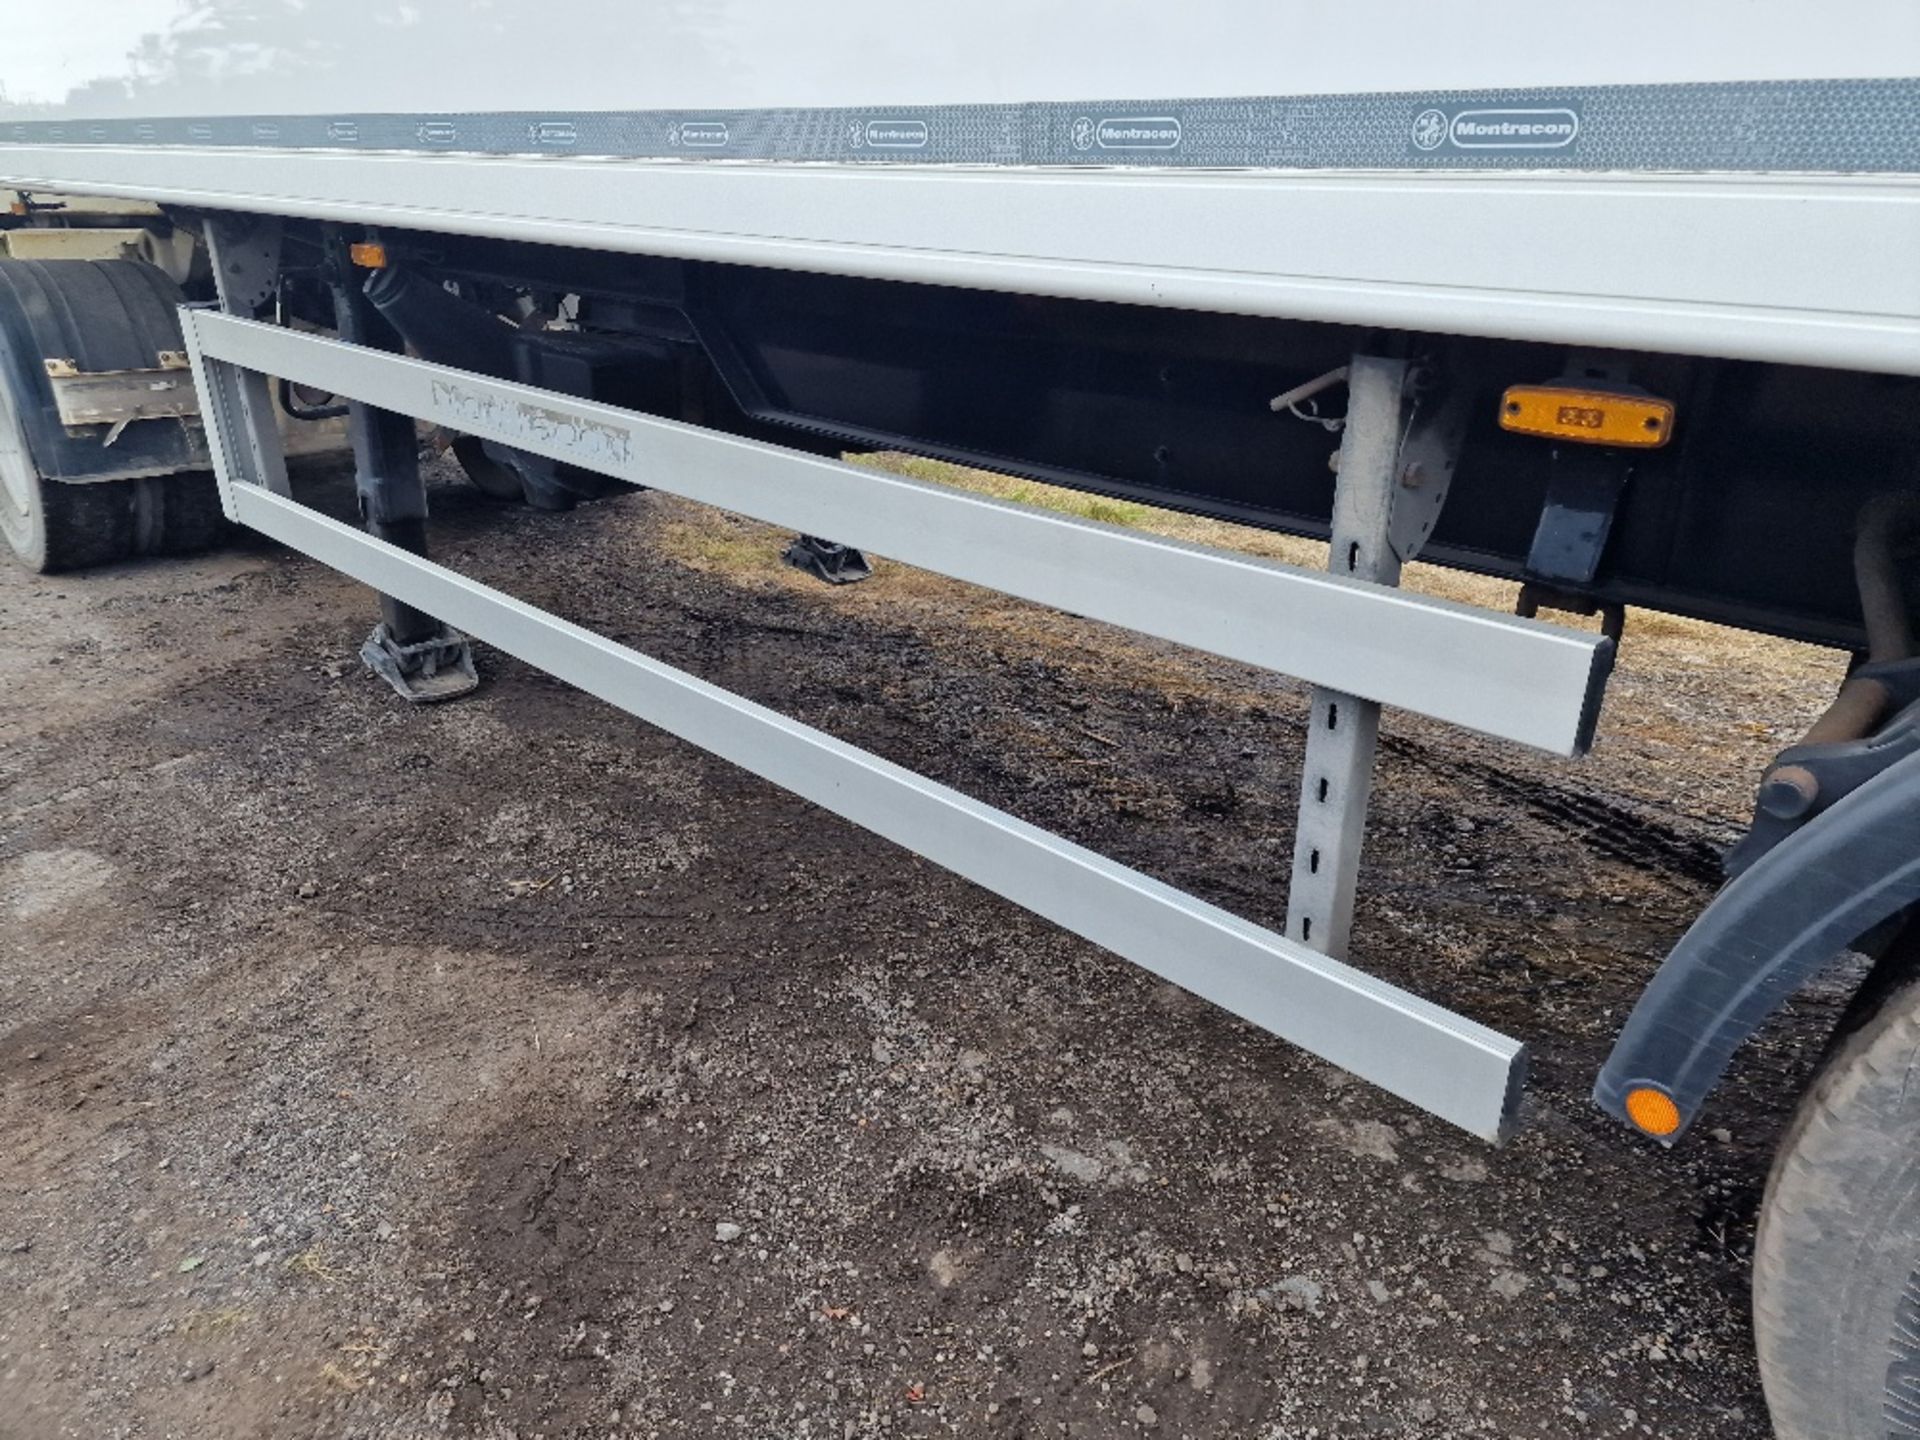 2014 Montracon 13.6m Tri-Axle Refrigerated Trailer - Image 4 of 18